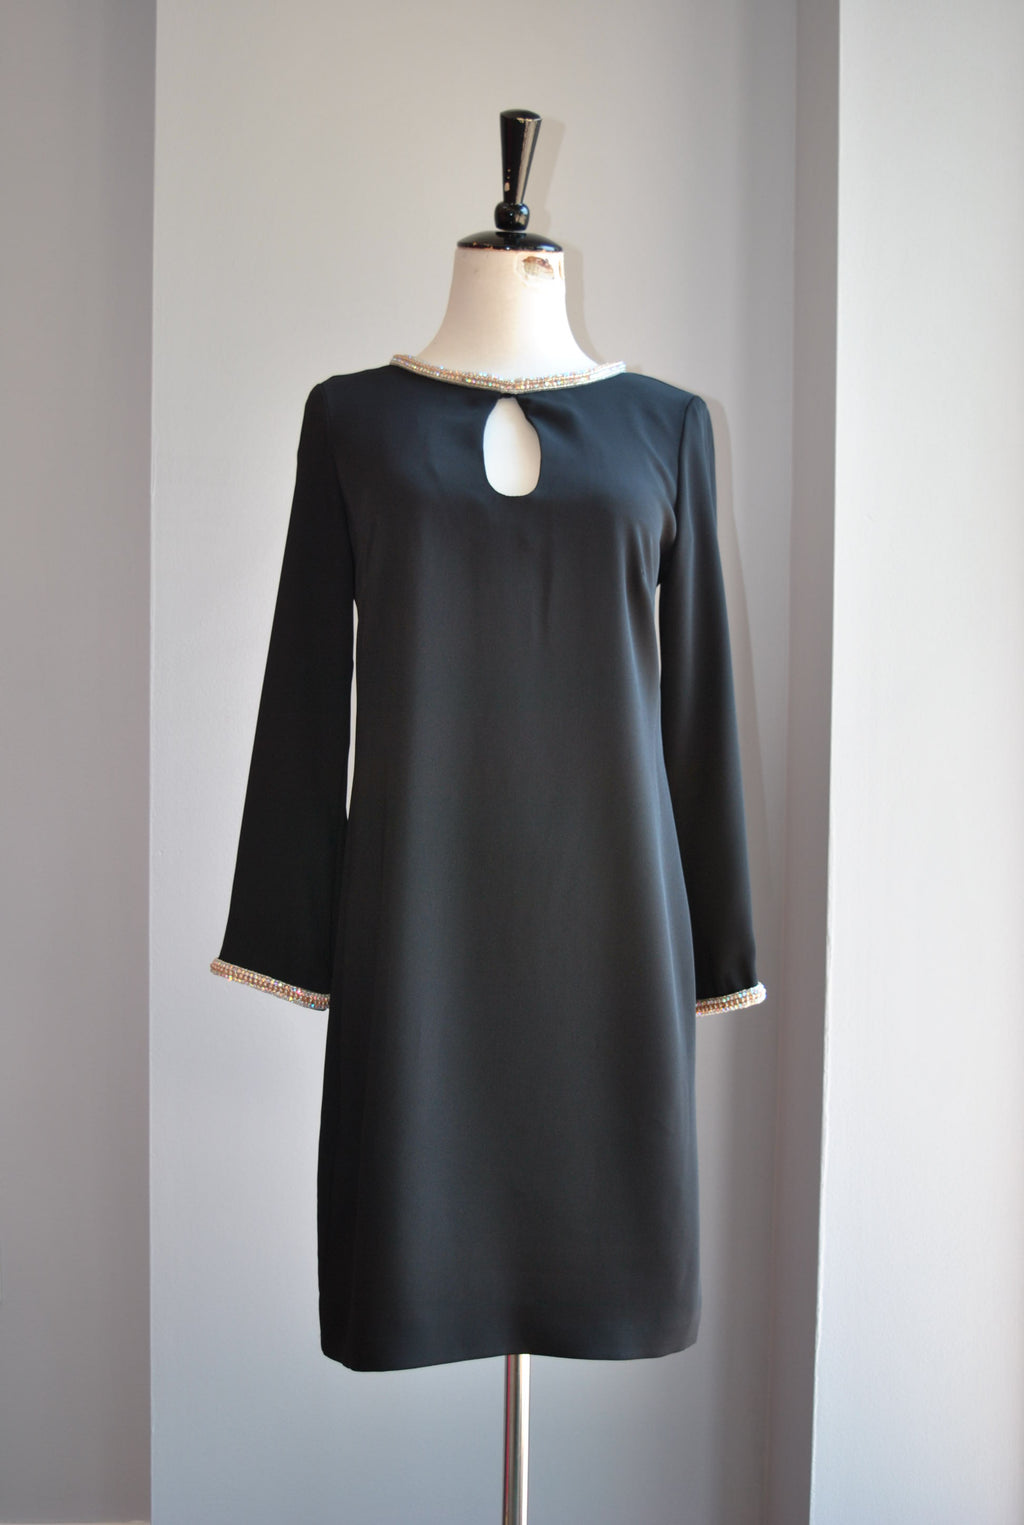 BLACK TUNIC DRESS WITH CRYSTALS